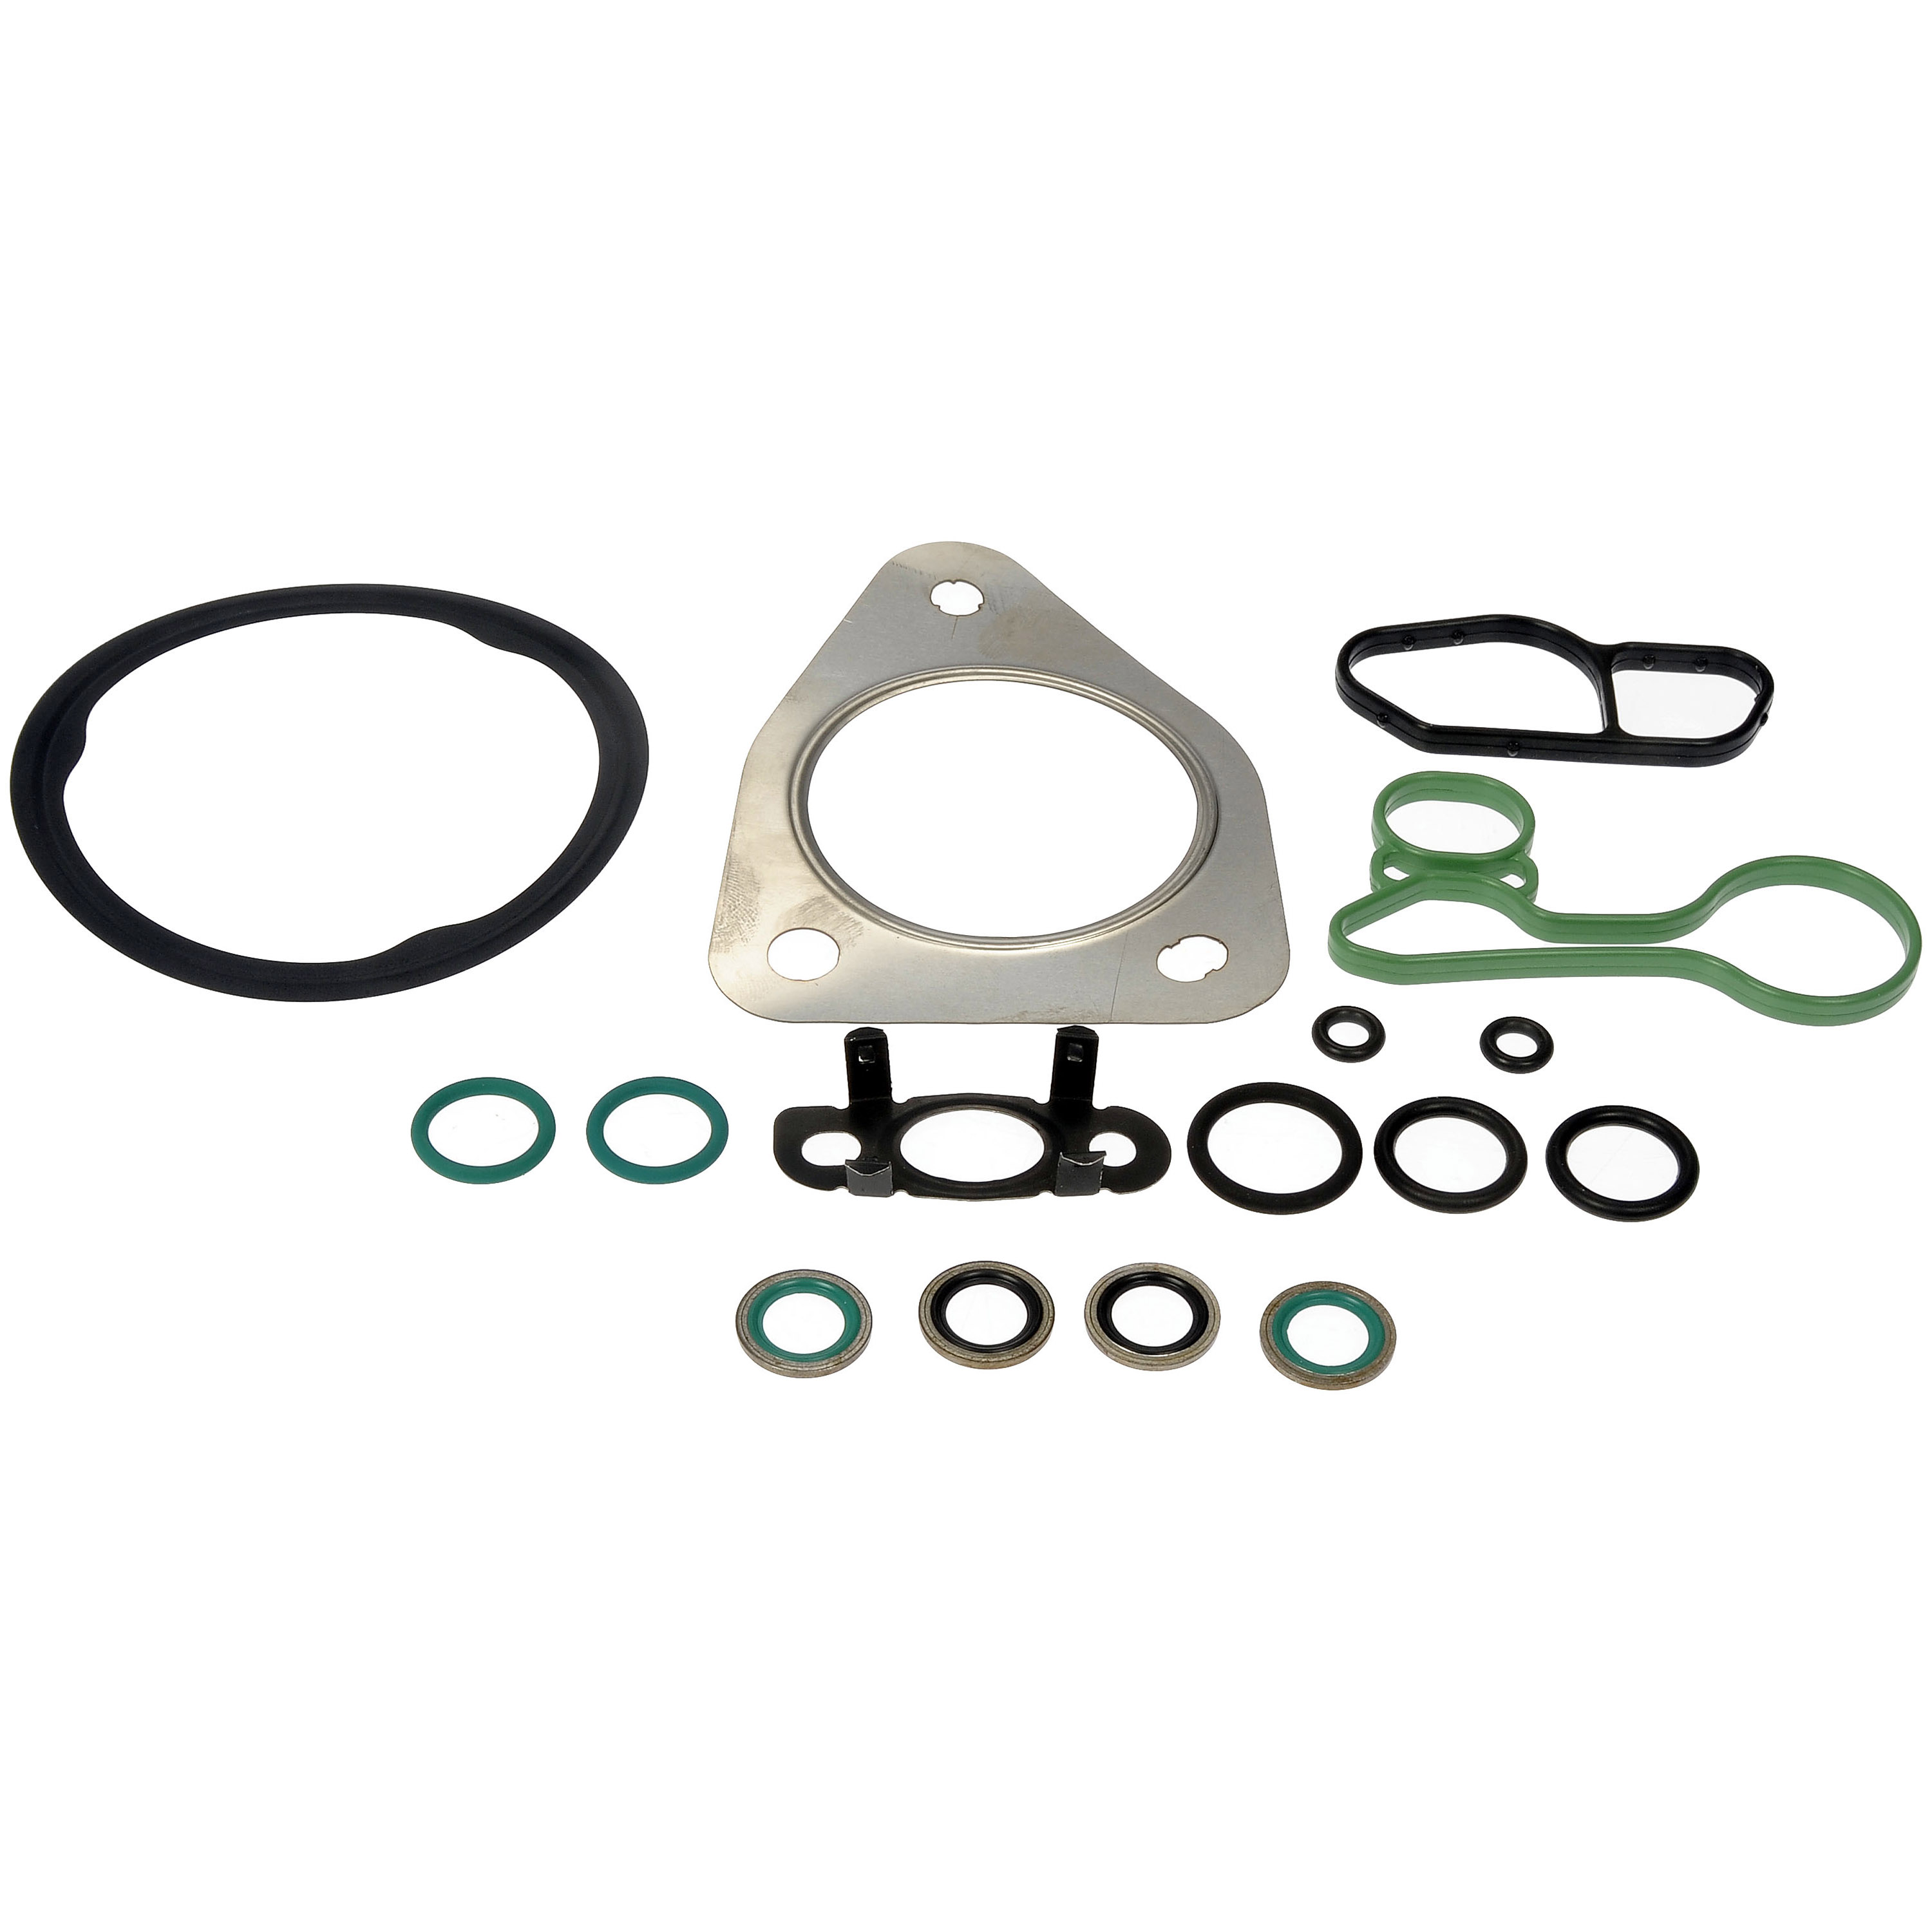 Dorman 926-166 Engine Oil Cooler Seal Kit for Specific Buick Chevrolet  Models Fits select: 2011-2016 CHEVROLET CRUZE, 2020-2021 CHEVROLET TRAX 